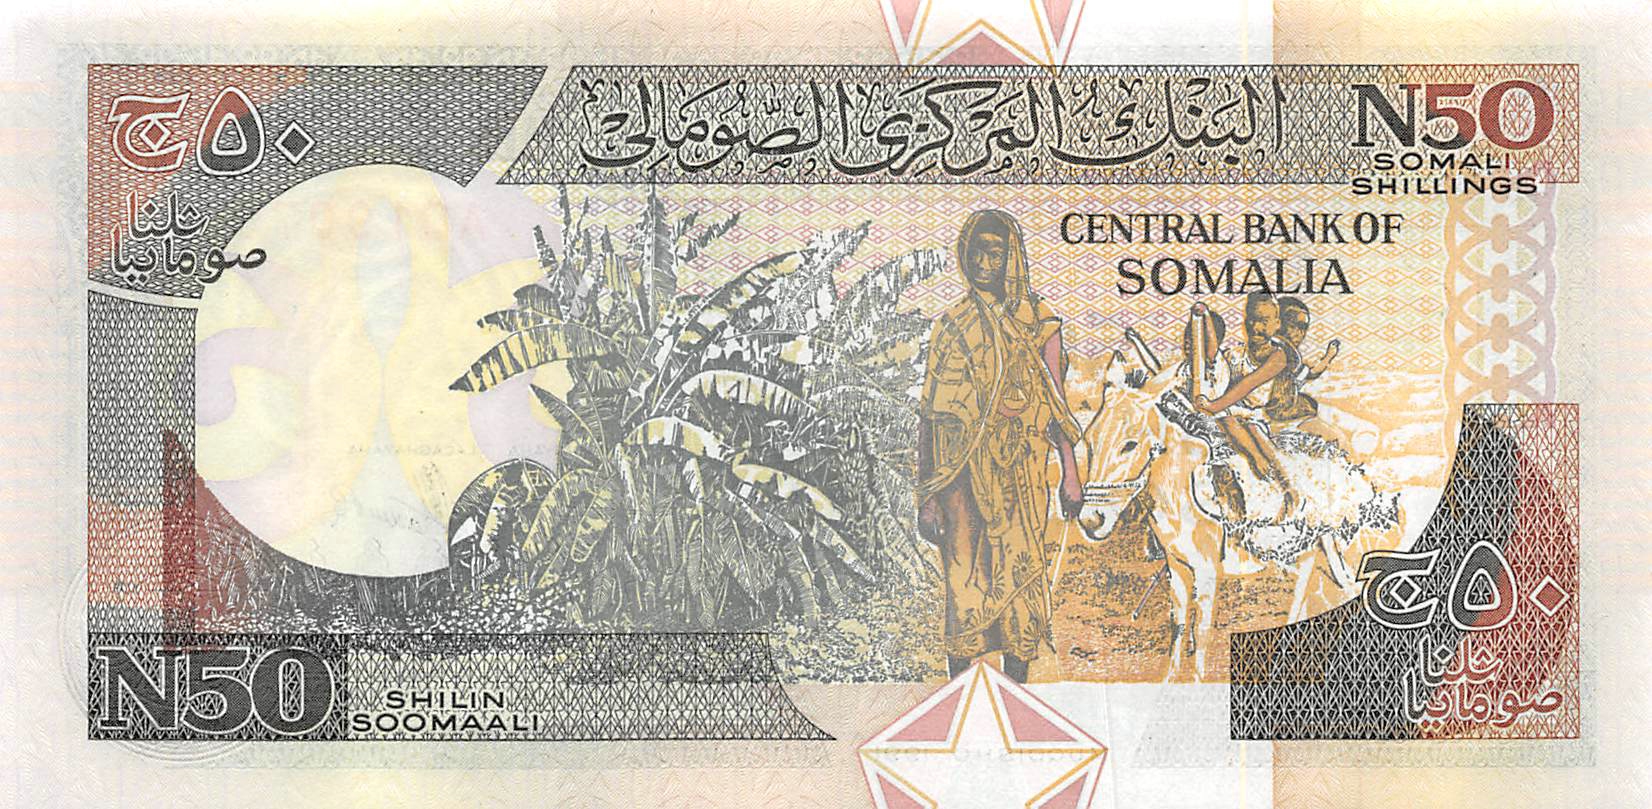 Details about   SOMALIA 50 SHILLINS  R2 1991 MN FORCE UNC XB REPLACEMENT MONEY BILL BANK NOTE 